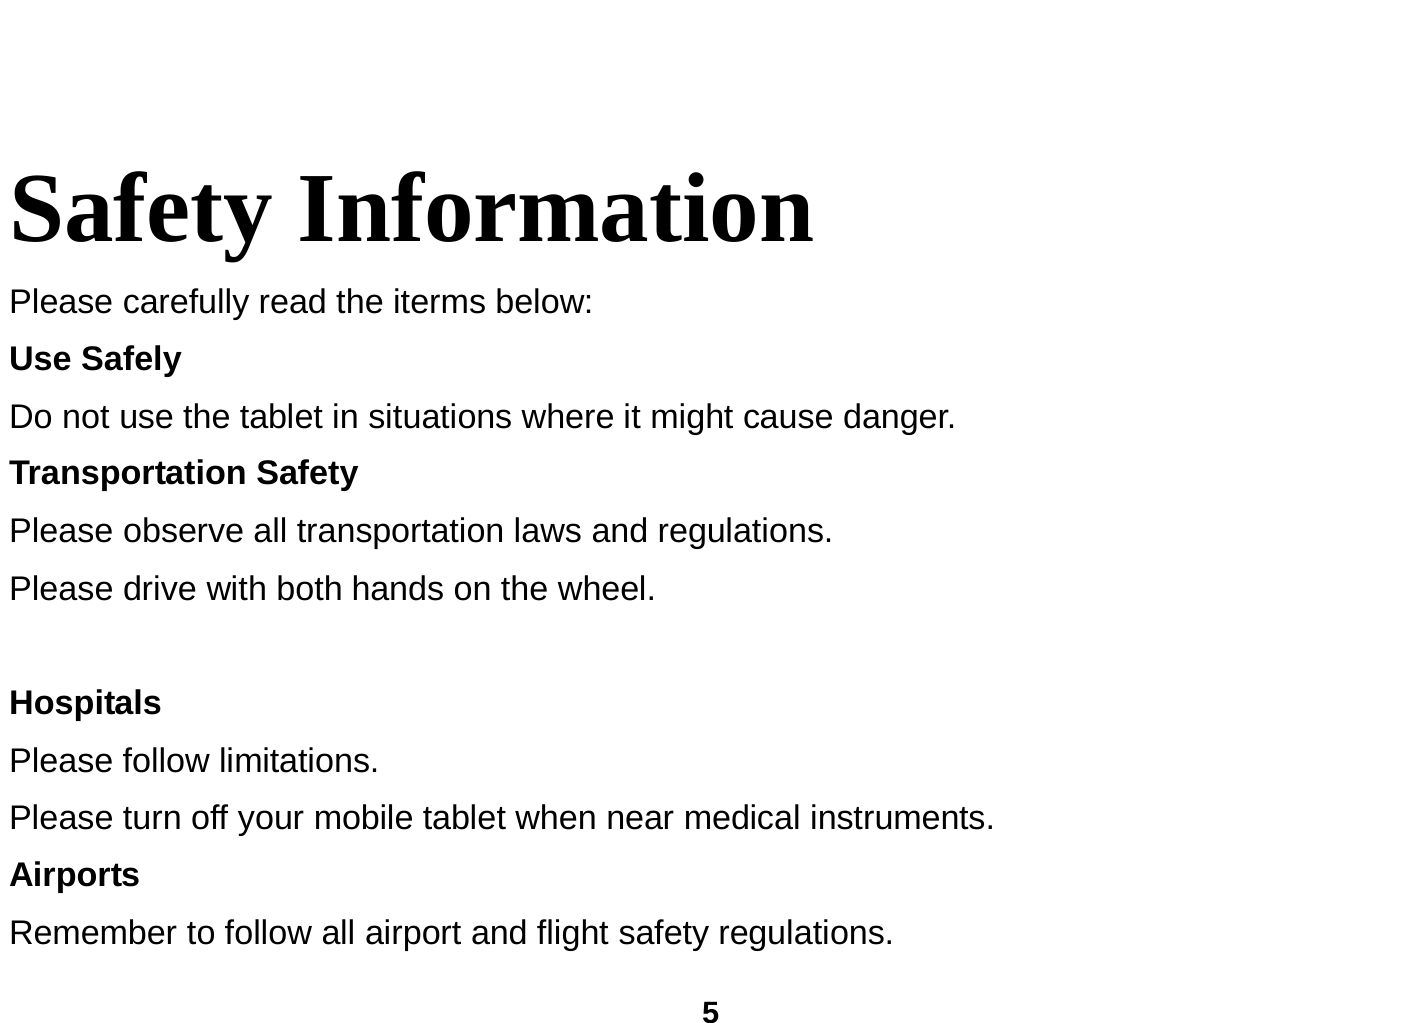  5  Safety Information   Please carefully read the iterms below: Use Safely Do not use the tablet in situations where it might cause danger. Transportation Safety Please observe all transportation laws and regulations. Please drive with both hands on the wheel.     Hospitals Please follow limitations. Please turn off your mobile tablet when near medical instruments. Airports Remember to follow all airport and flight safety regulations.   